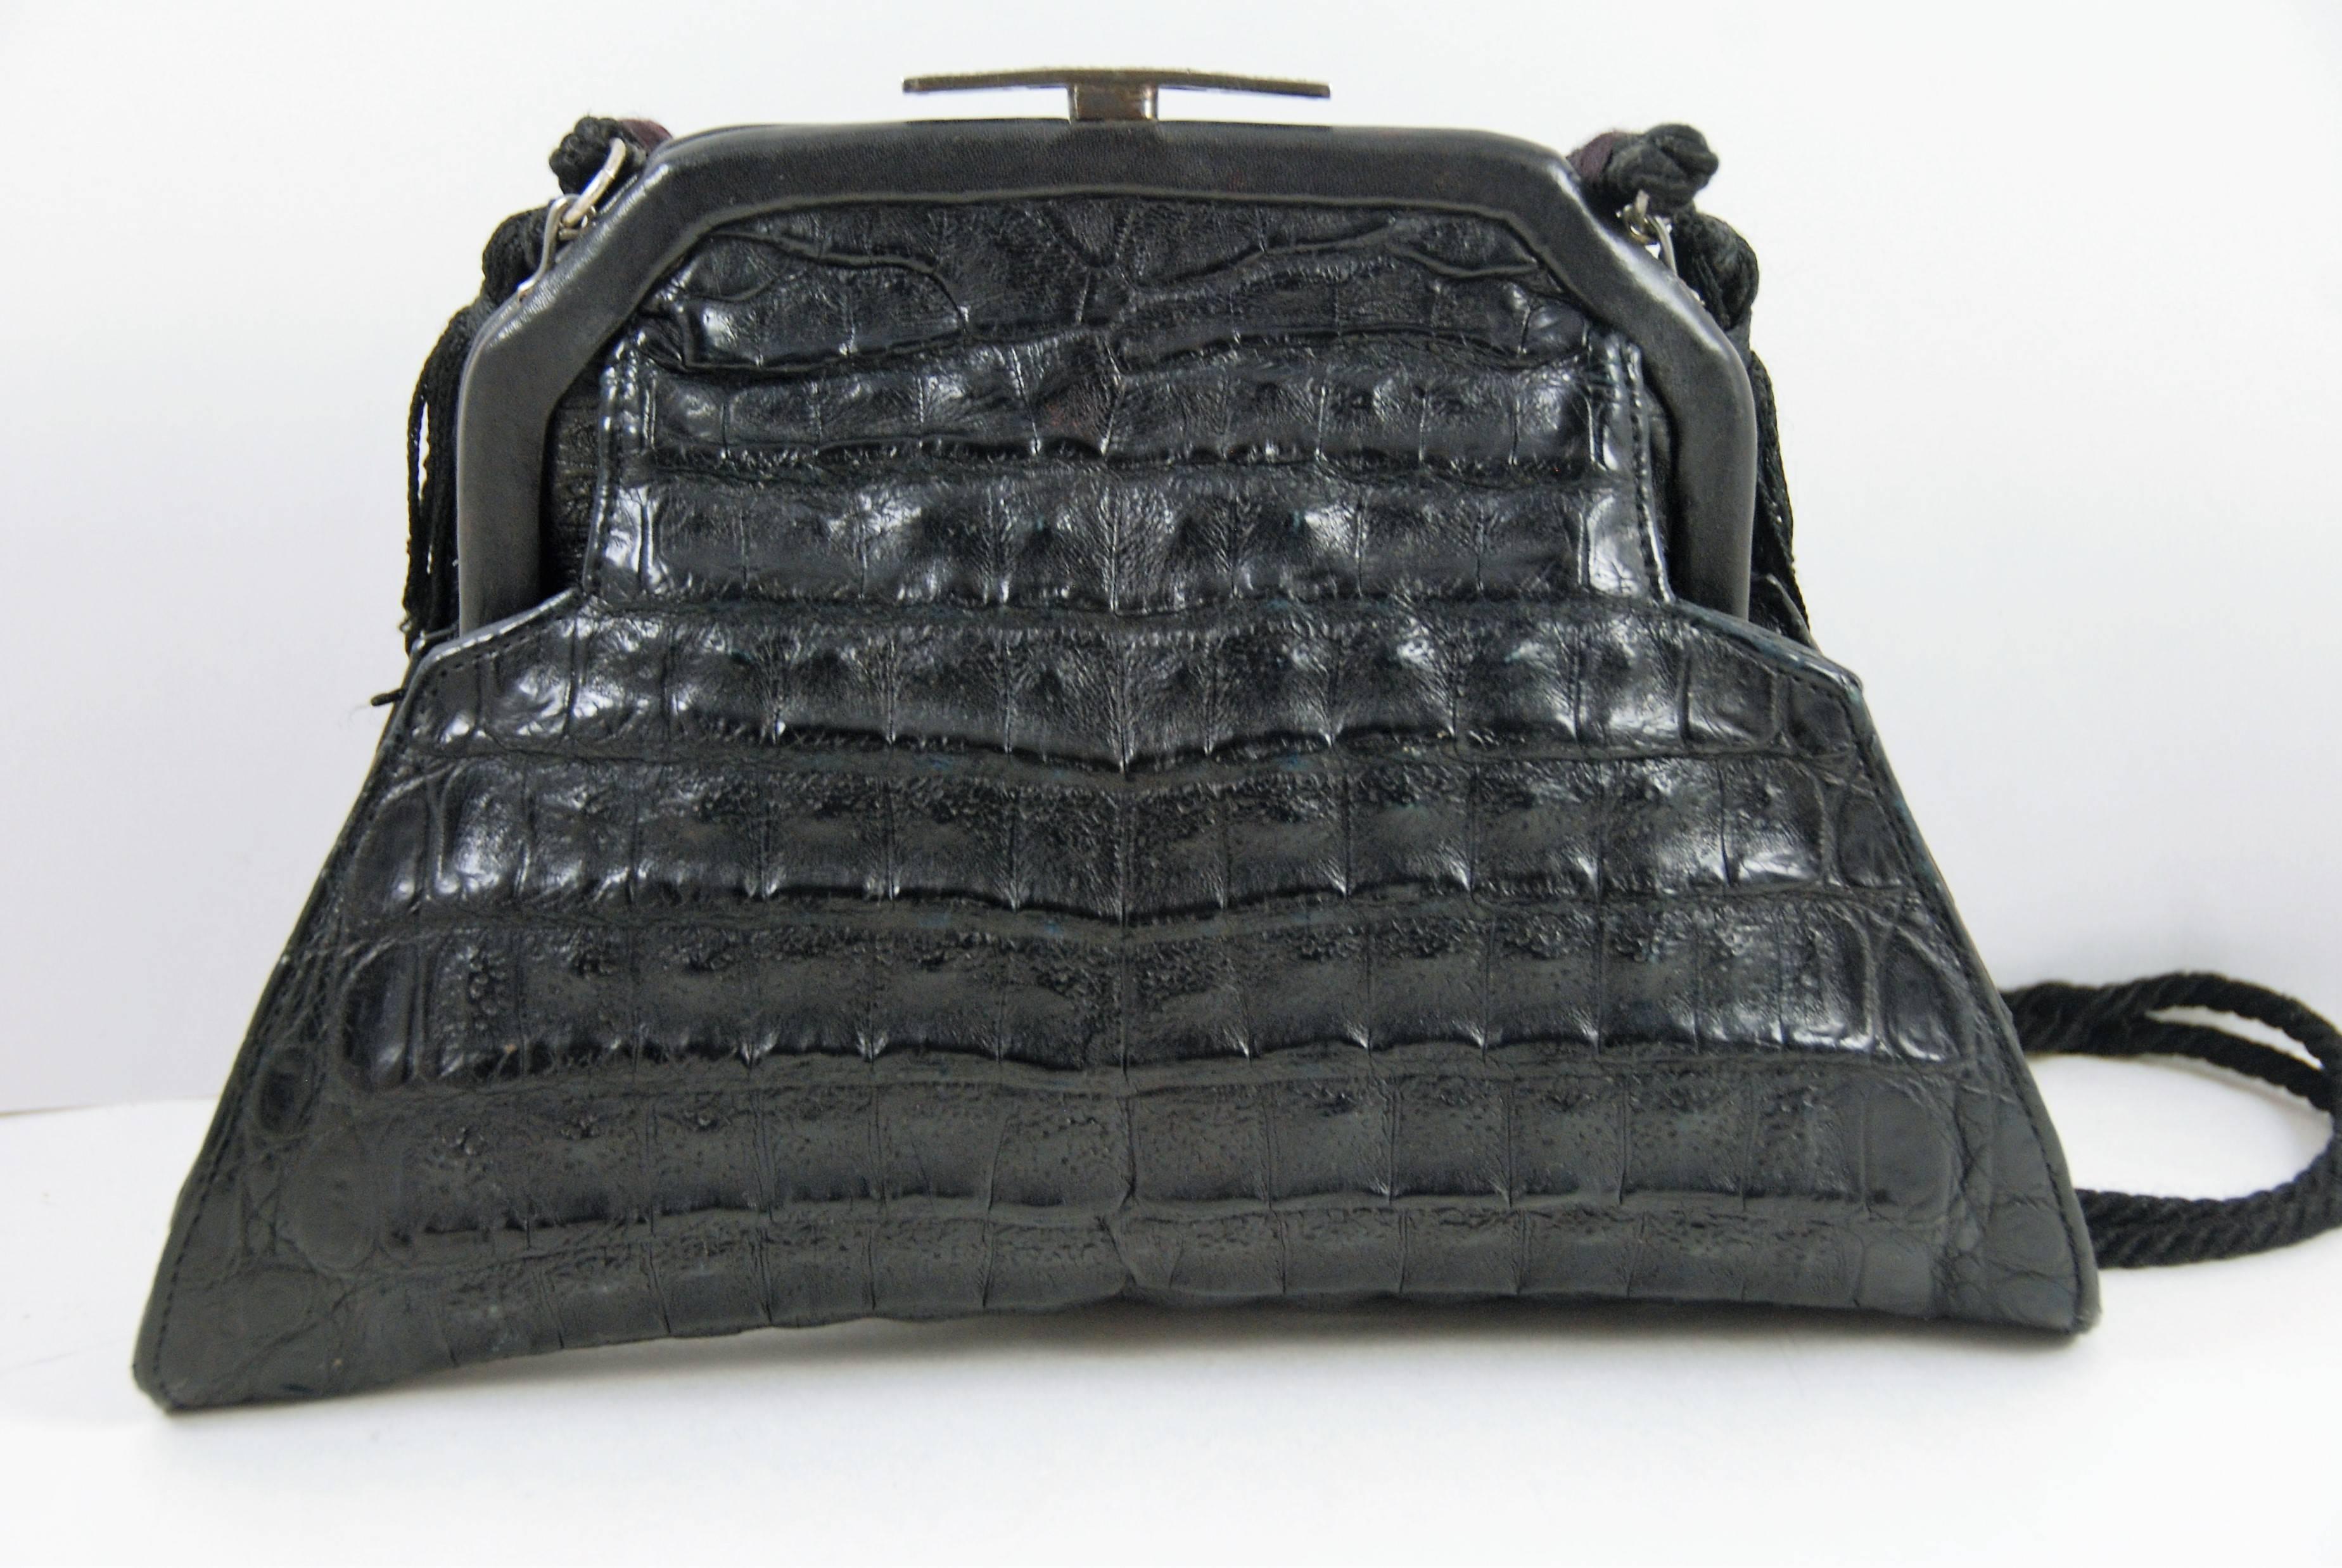 Jocomo evening bag from the 1980s made of black alligator and an art deco silver and marcasite frame. Jacomo worked in the 1980s and was know for adding new bodies to antique frames. Each bag was one of a kind. Inside has a satin lining in brown and